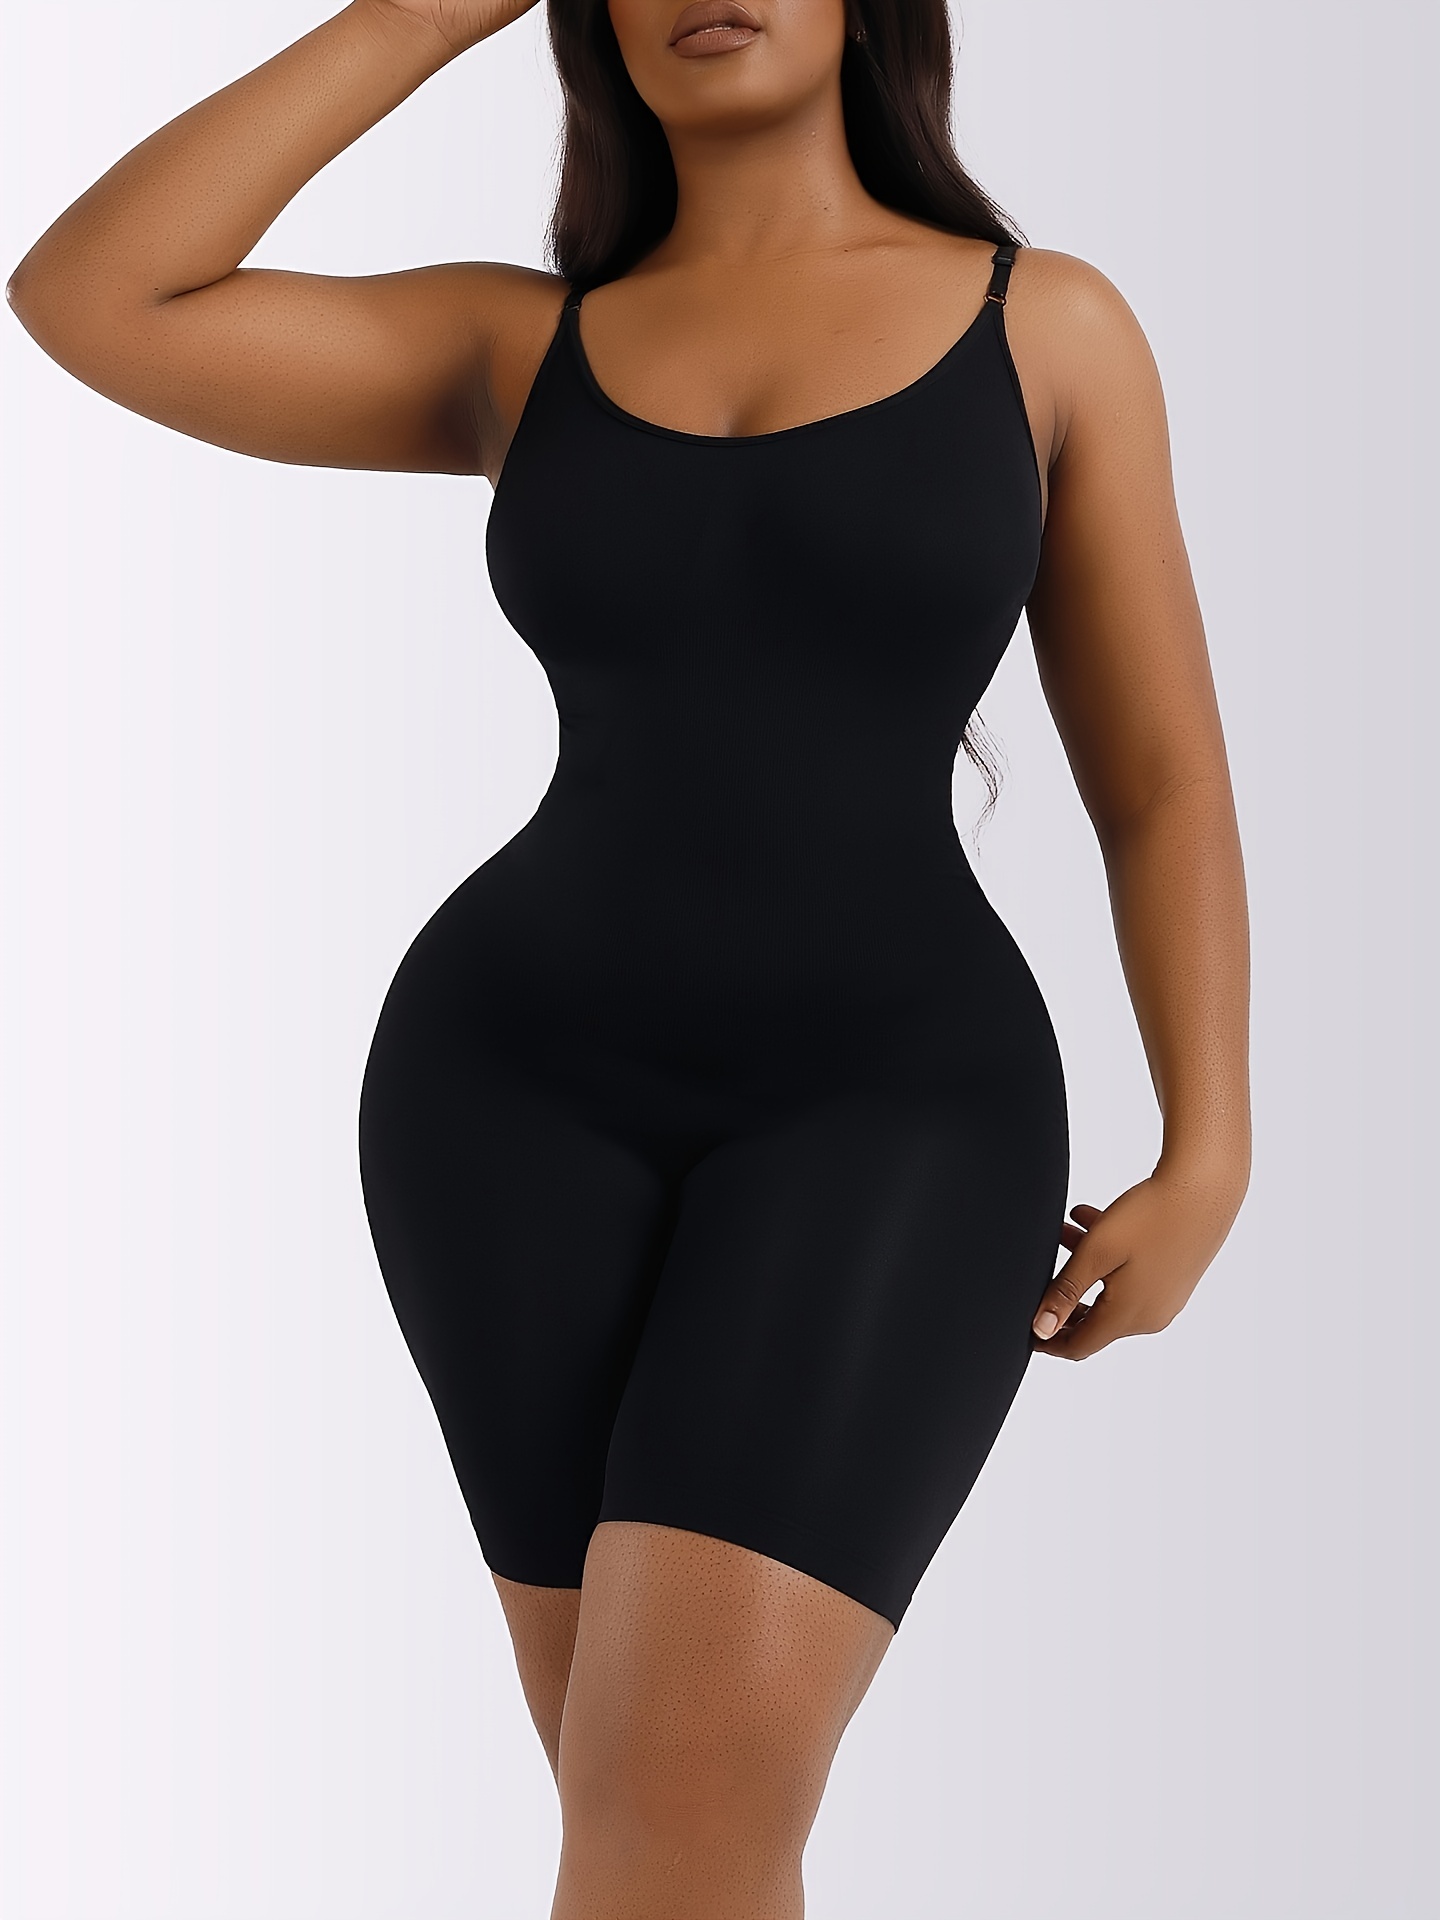  HGps8w Shapewear for Women Sexy Sleeveless Lace Bodysuit  Removable Padded Butt Lifter Thigh Slimmer Deep V Neck Leotard Top :  Clothing, Shoes & Jewelry